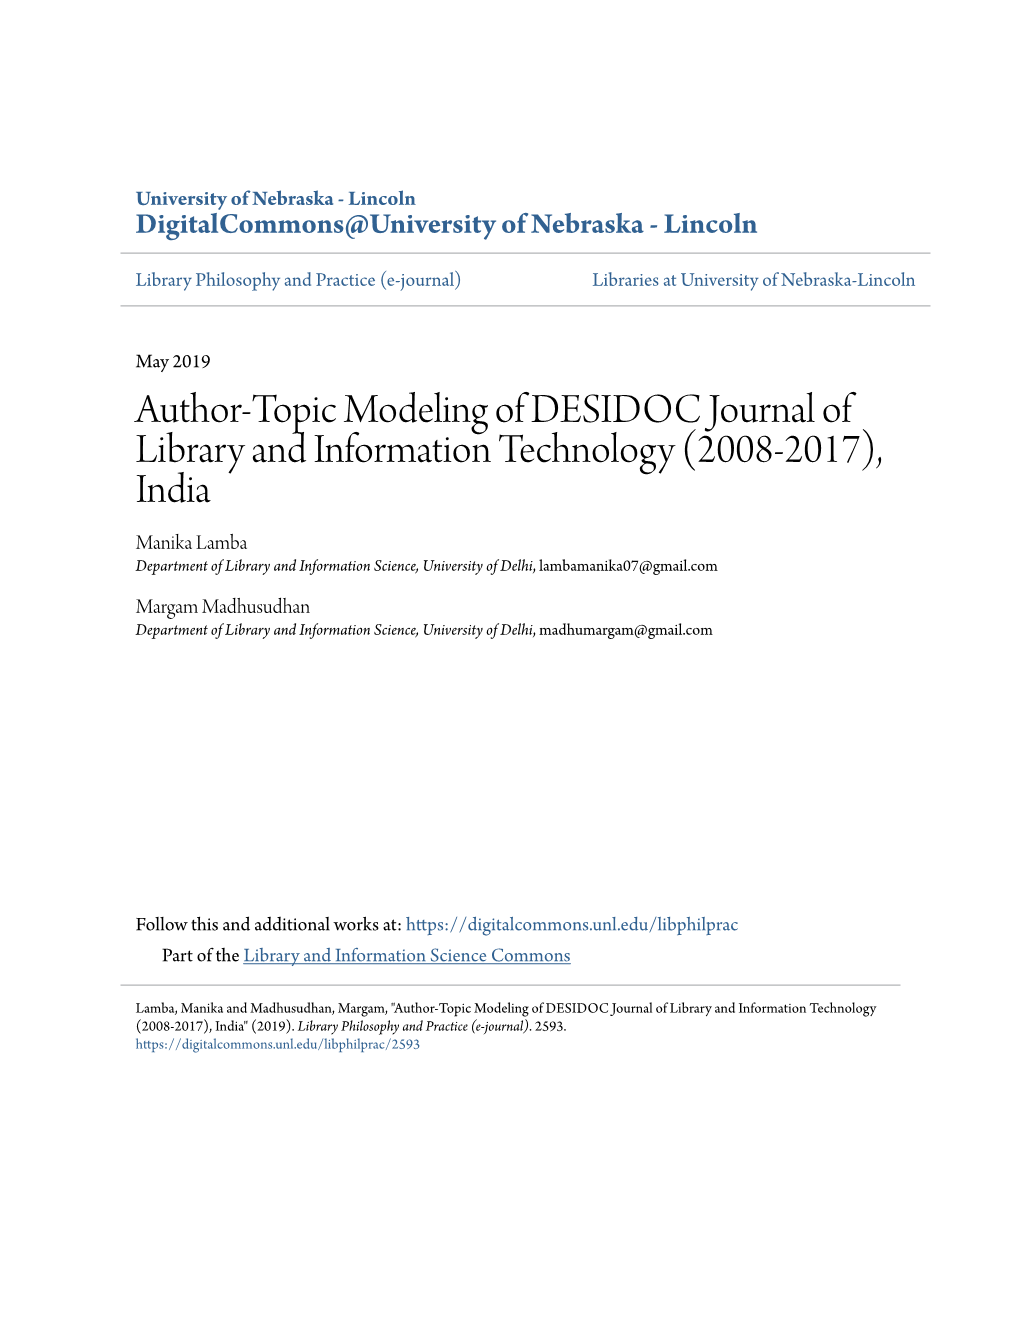 Author-Topic Modeling of DESIDOC Journal of Library And